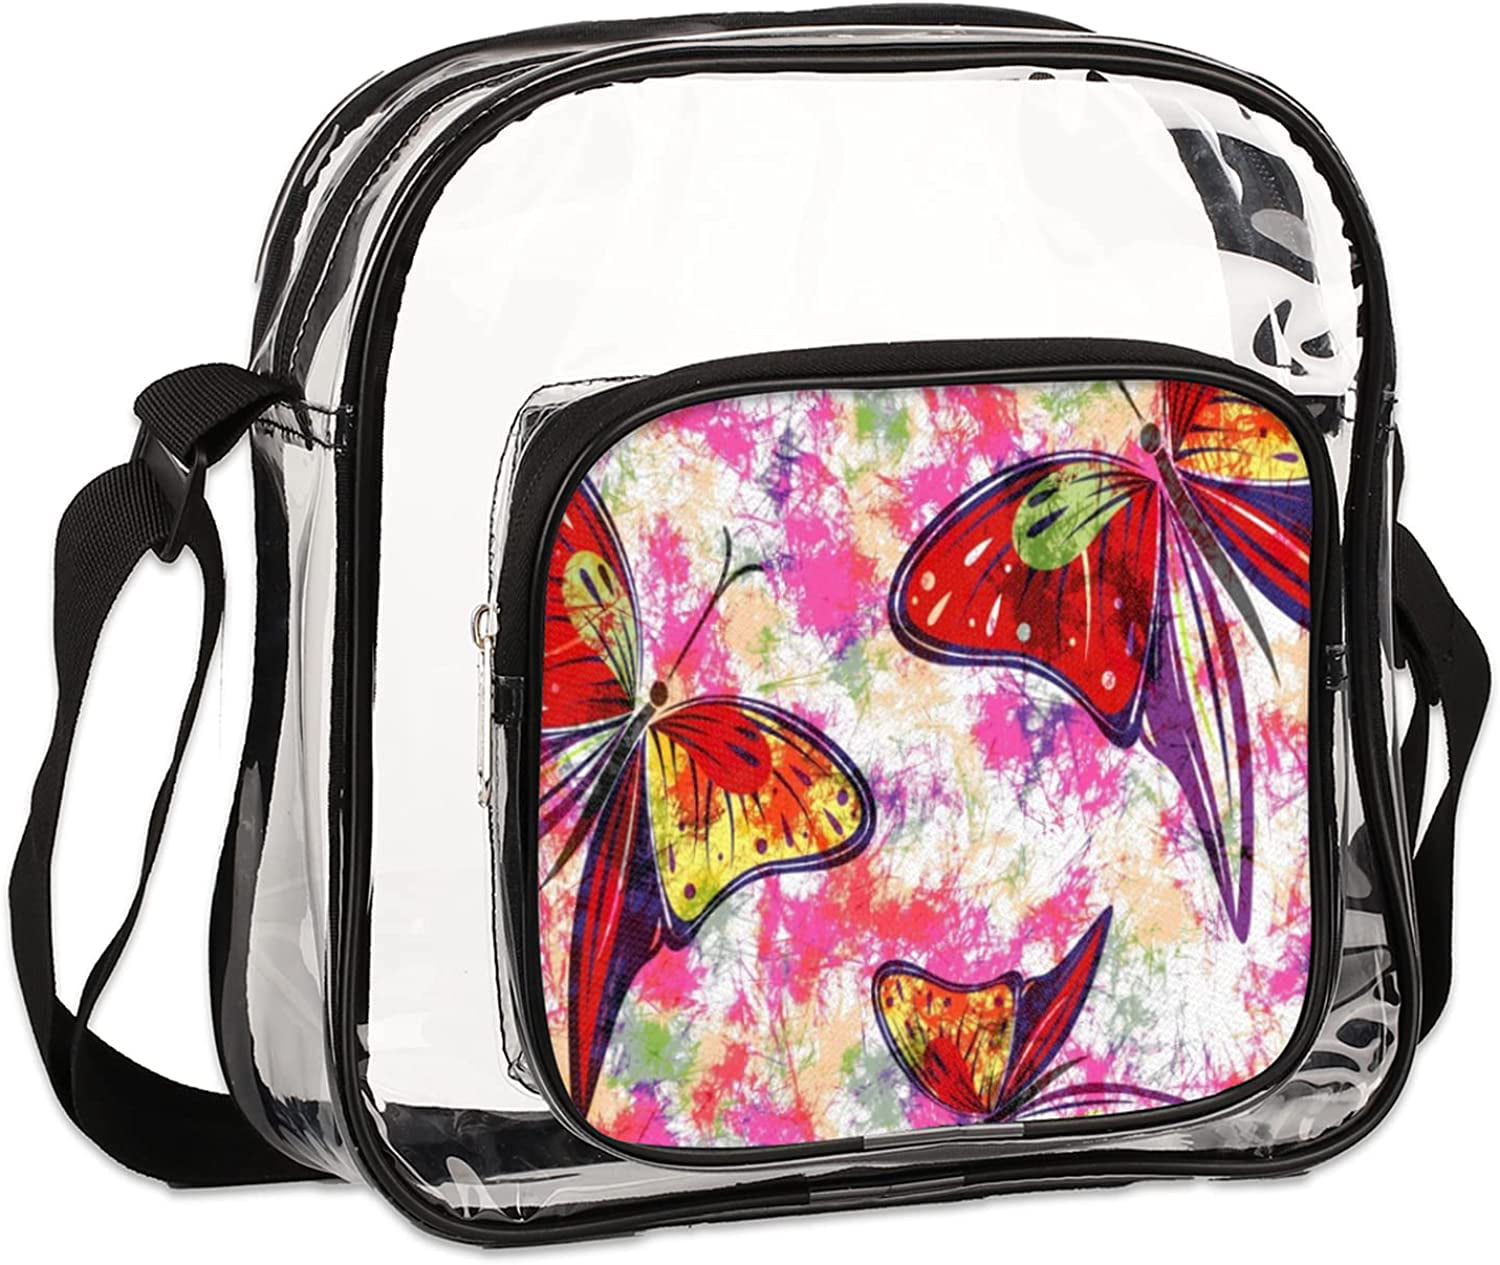 with Front Zipped Pocket and Adjustable Shoulder Strap Stadium Approved Small Clear Messenger Bag 